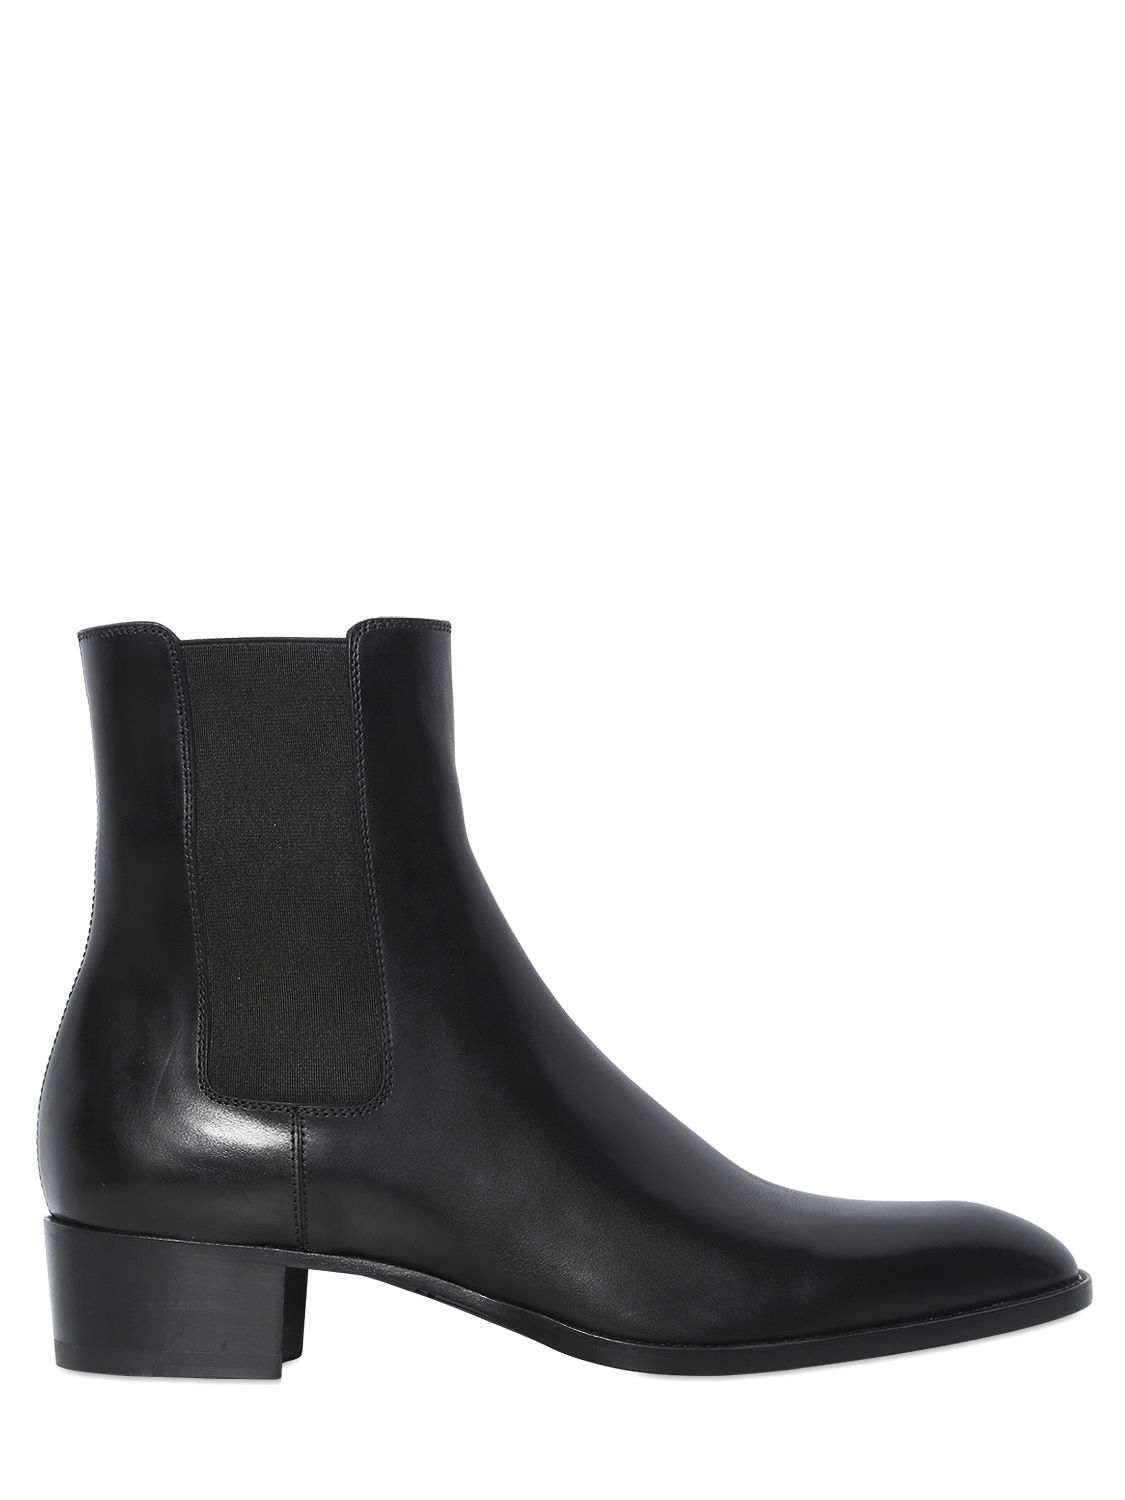 Saint Laurent 40mm Wyatt Leather Chelsea Cropped Boots in Black 